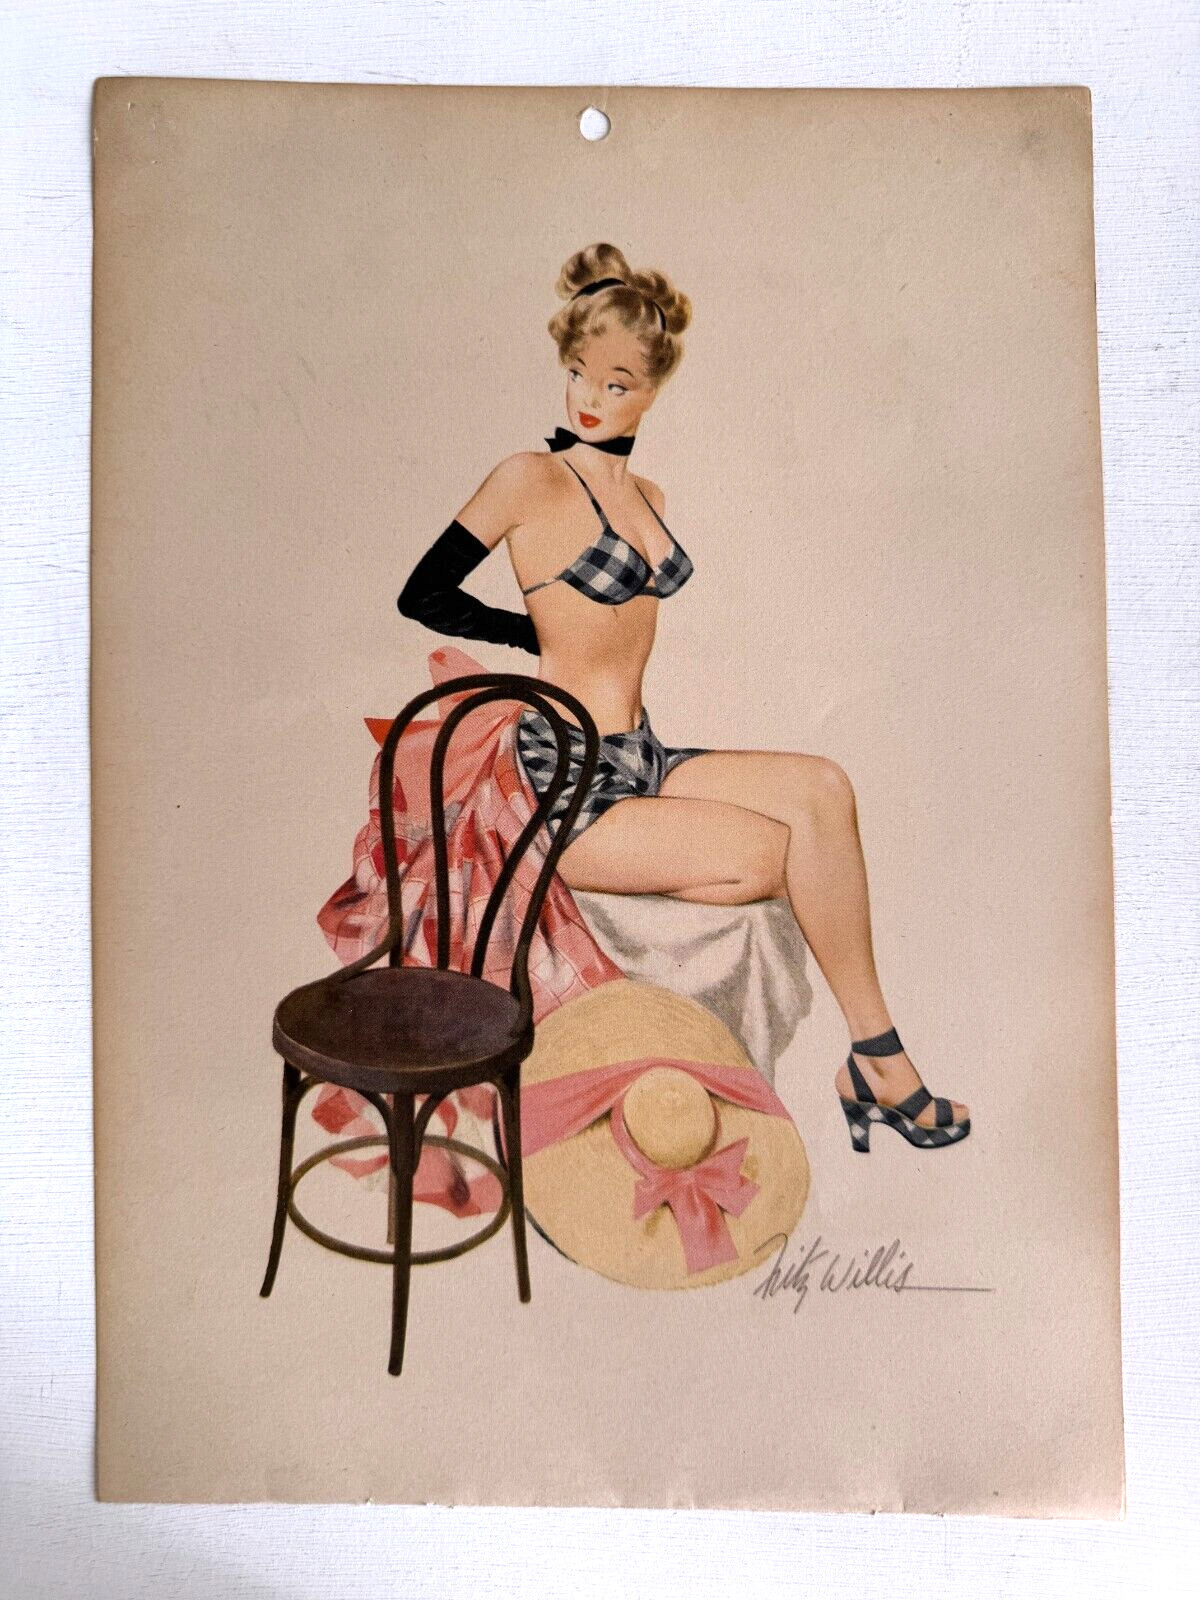 Original 1948 Pinup Girl Calendar Page by Fritz Willis- Blond in Black Plaid